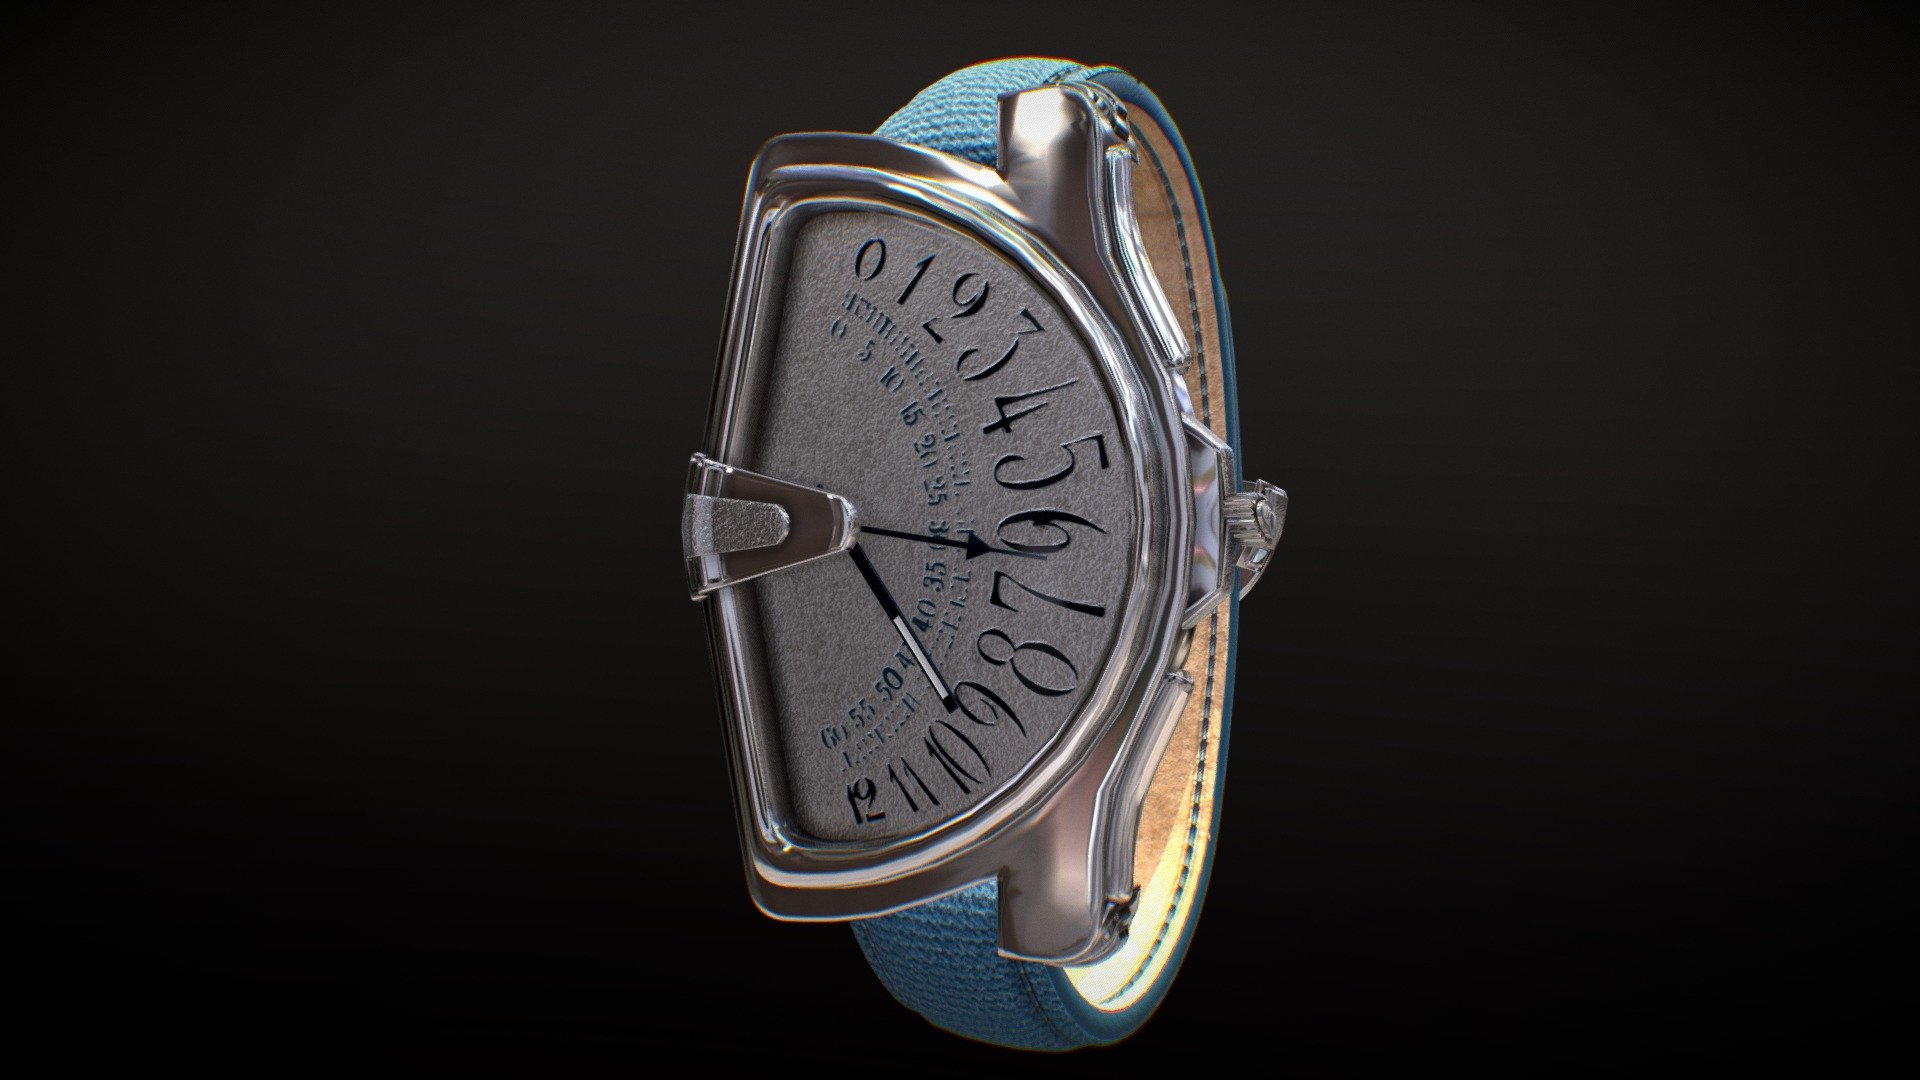 Awesome stainless steel Ar-Watches Watch.

Currently available for download in FBX format.

3D model developed by AR-Watches 3d model